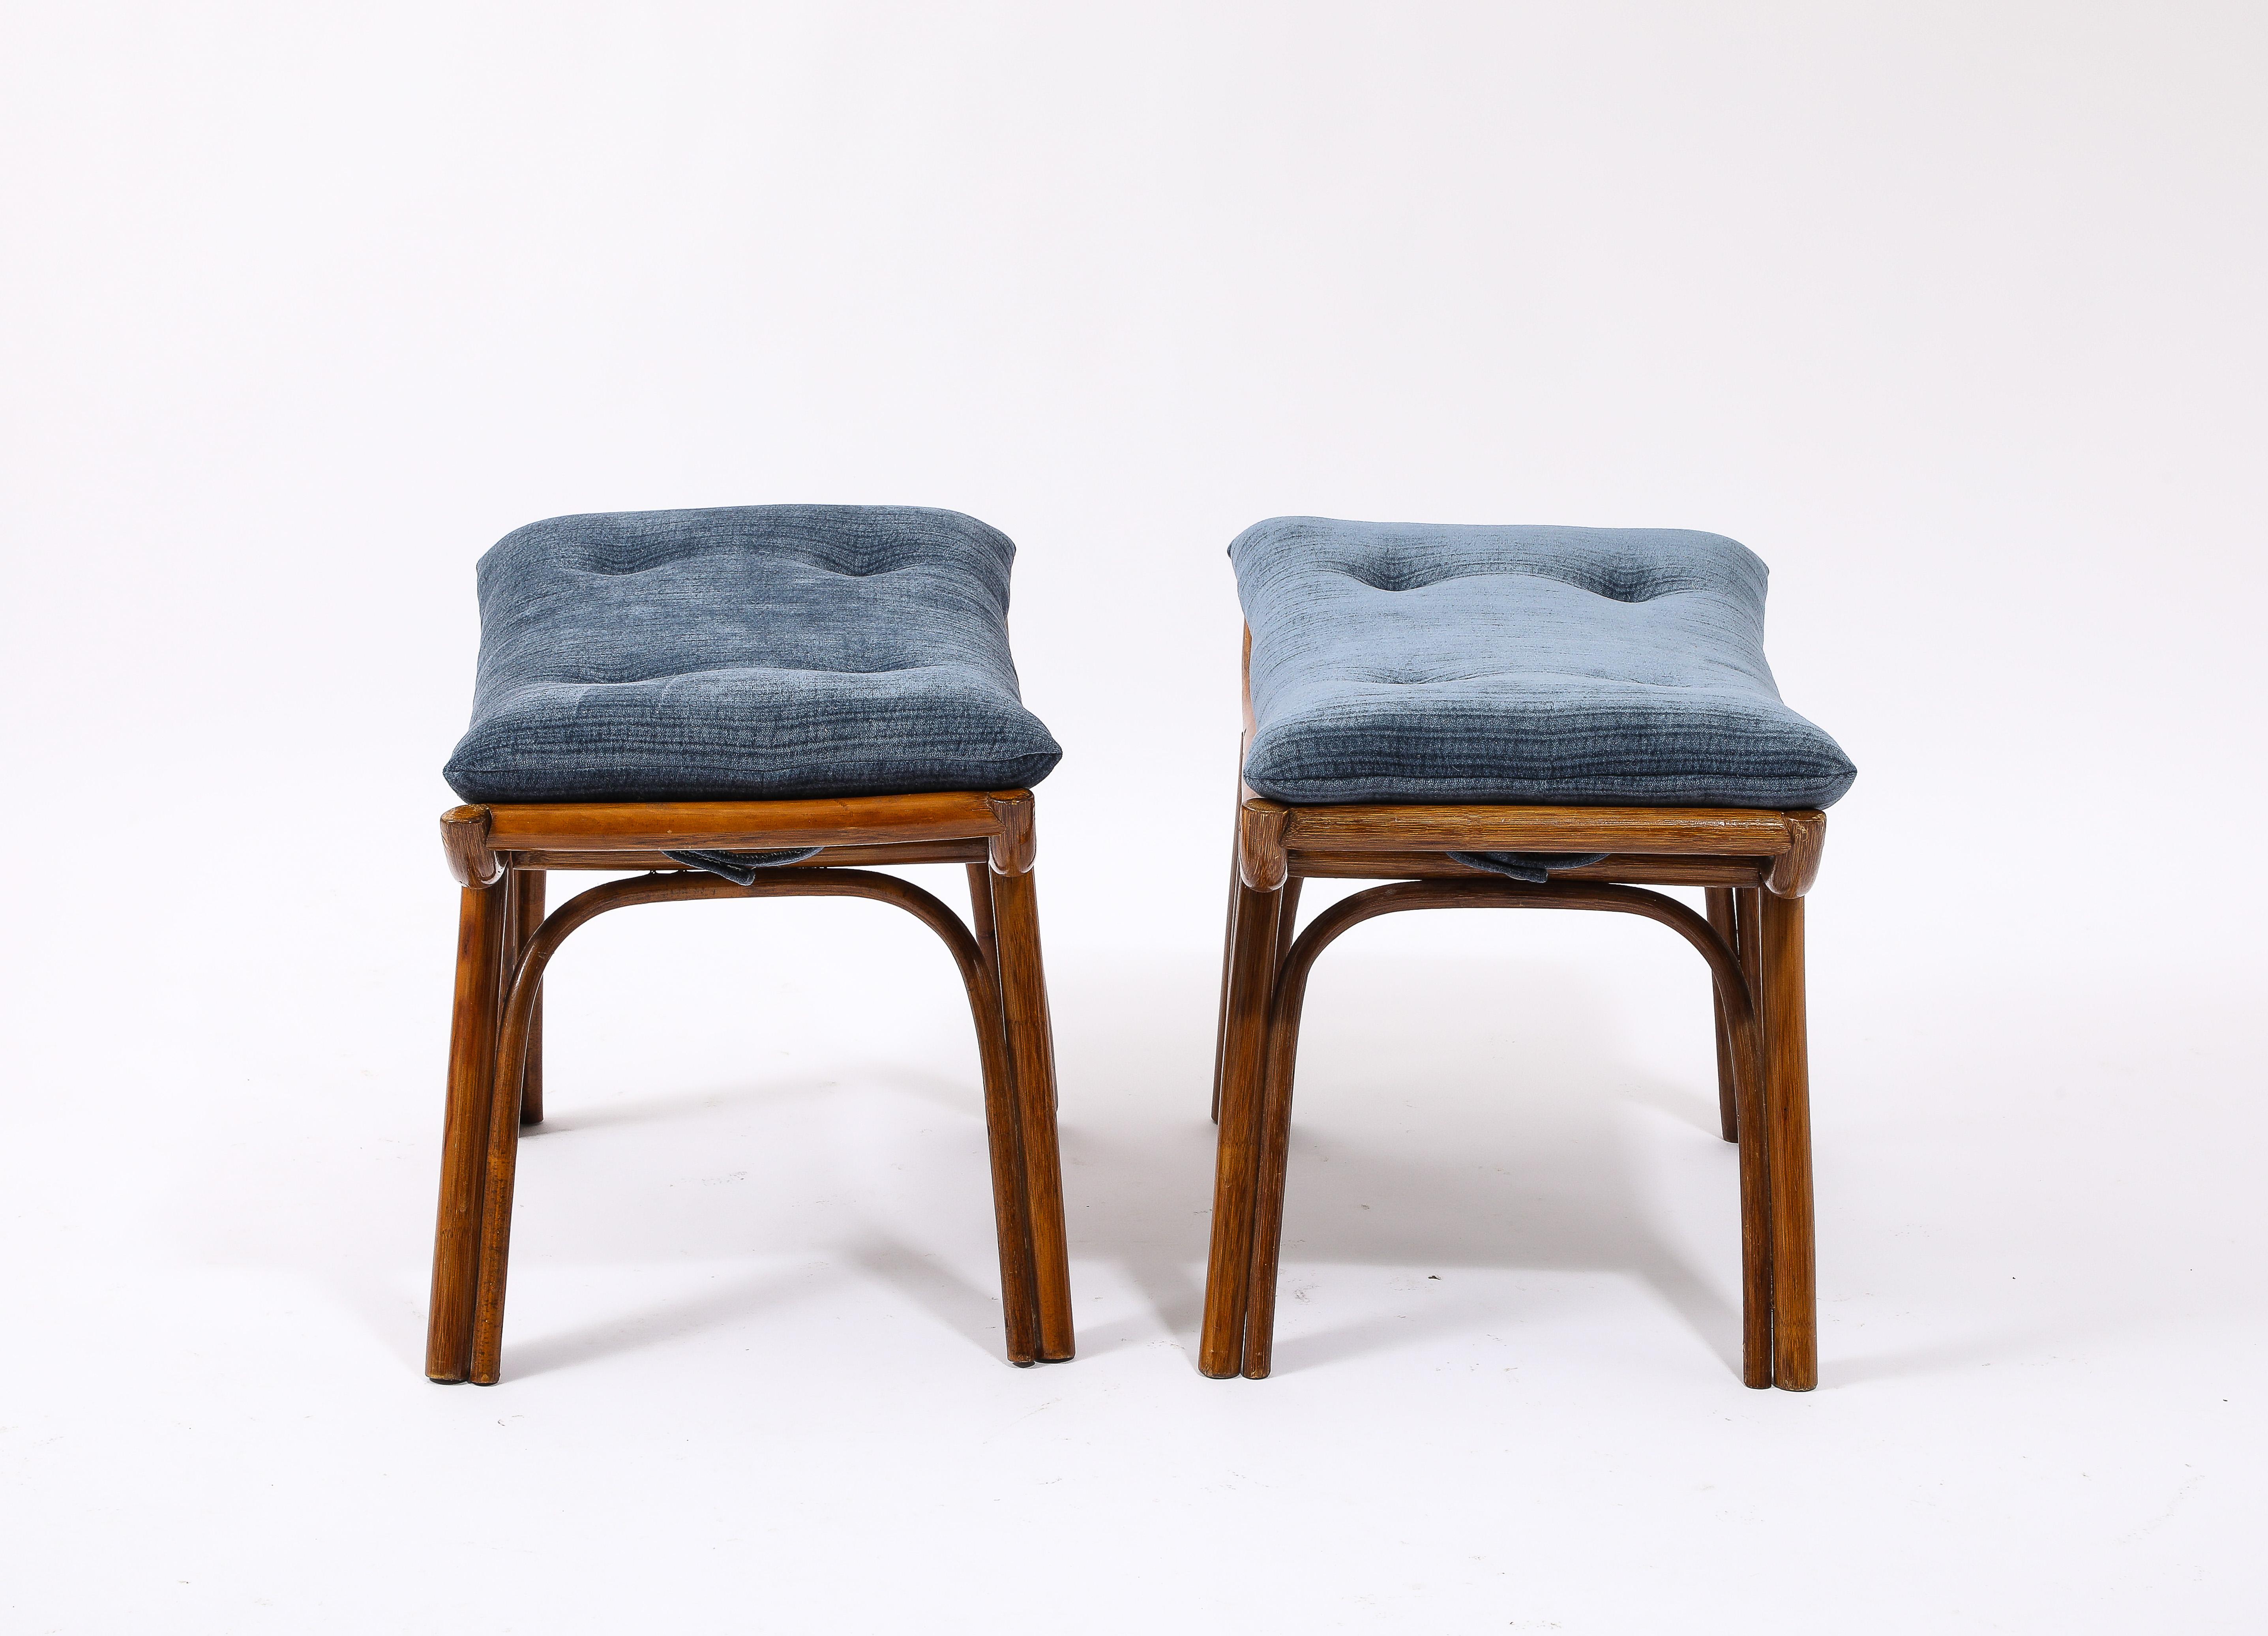 French Curved Bamboo Stools in Blue Mohair, France 1950's For Sale